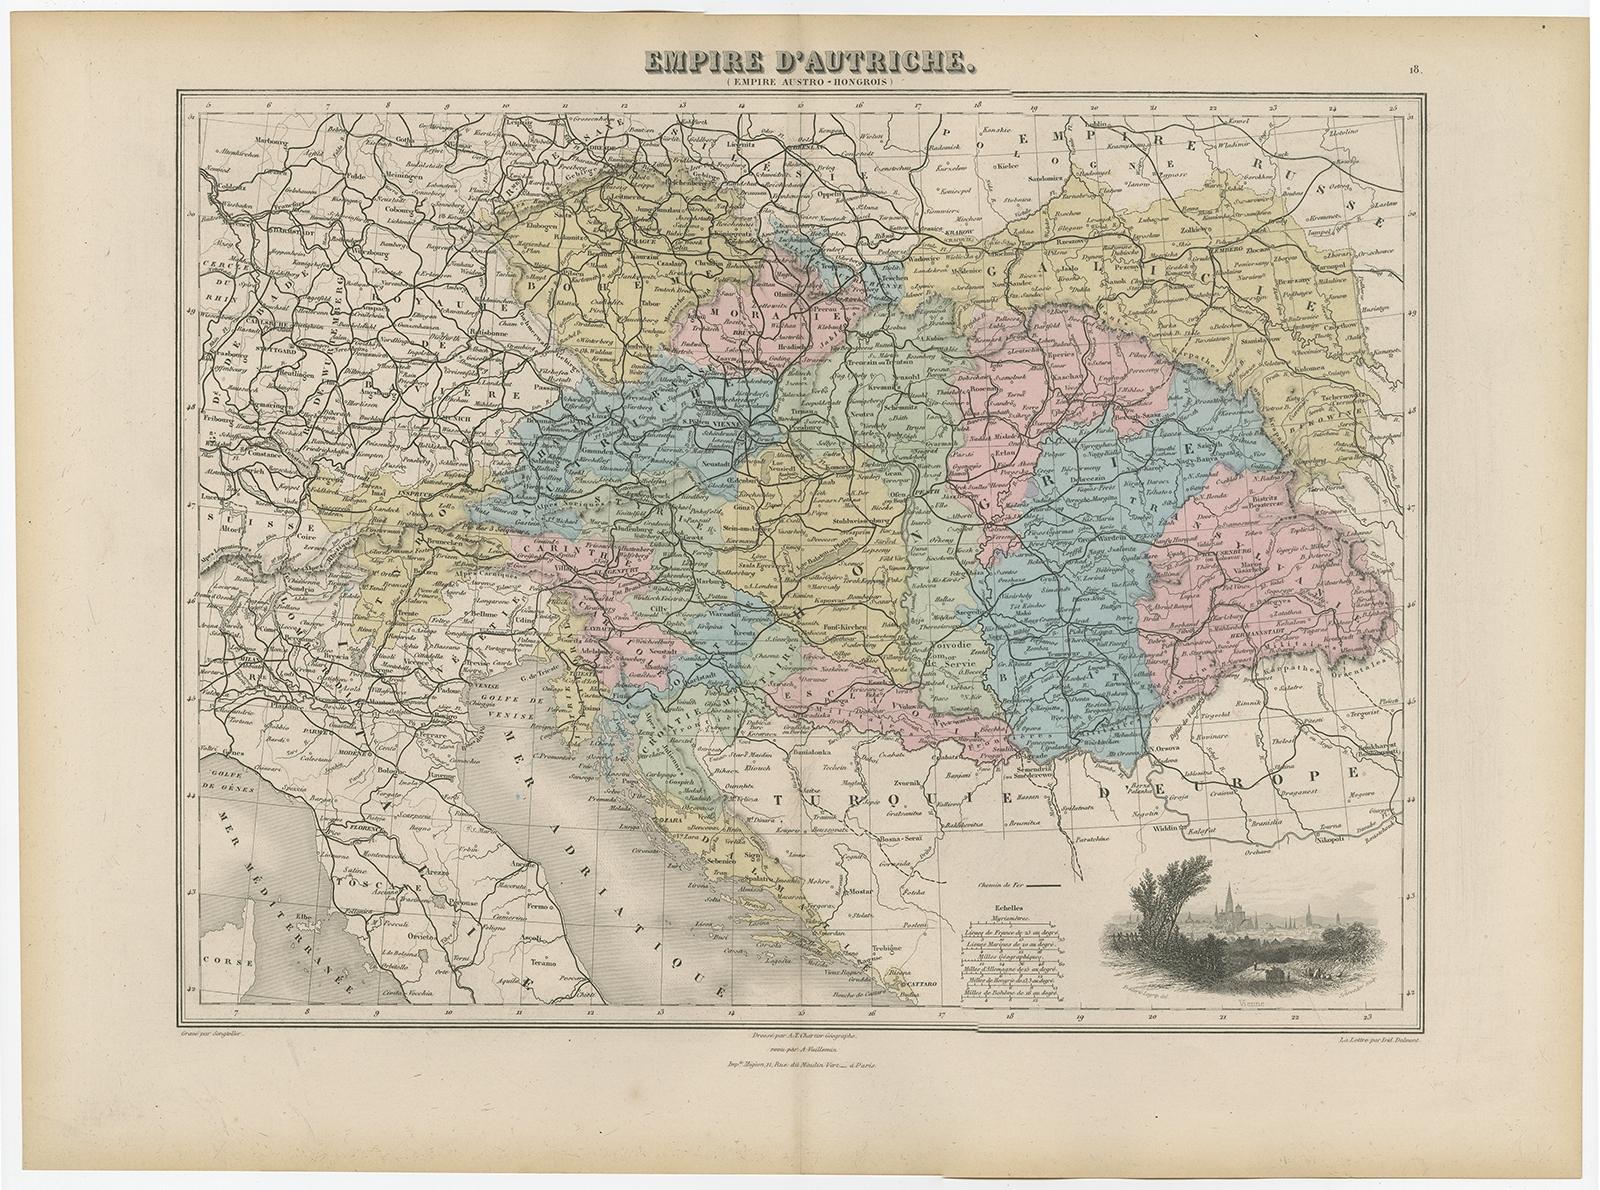 Antique map titled 'Empire d'Autriche'. 

Old map of the Austrian Empire. With decorative vignette with a view of Vienna. This map originates from 'Géographie Universelle Atlas-Migeon' by J. Migeon.

Artists and Engravers: Published by J.